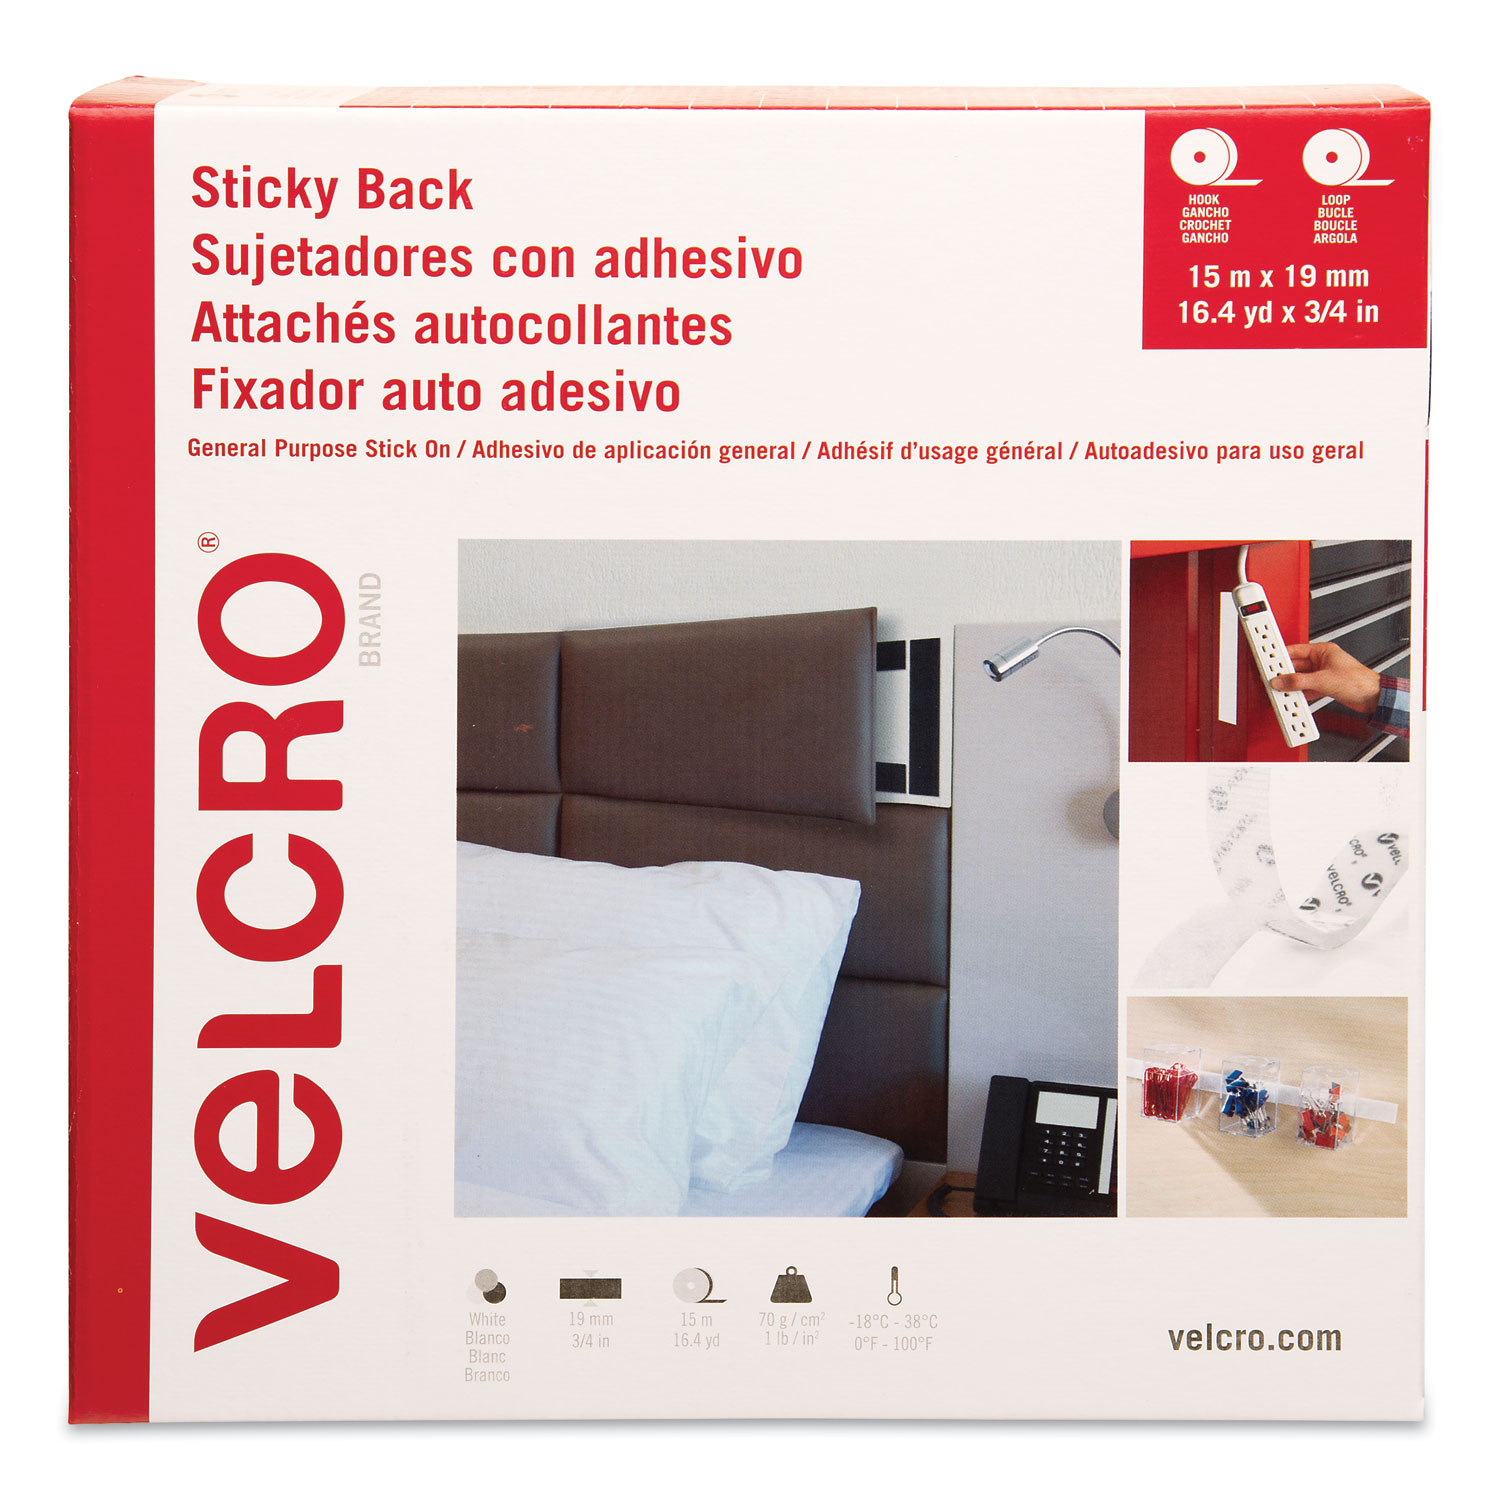 VELCRO Brand Sticky Back Tape Roll Hook and Loop Adhesive Strips, Clear,  50ft x 3/4in